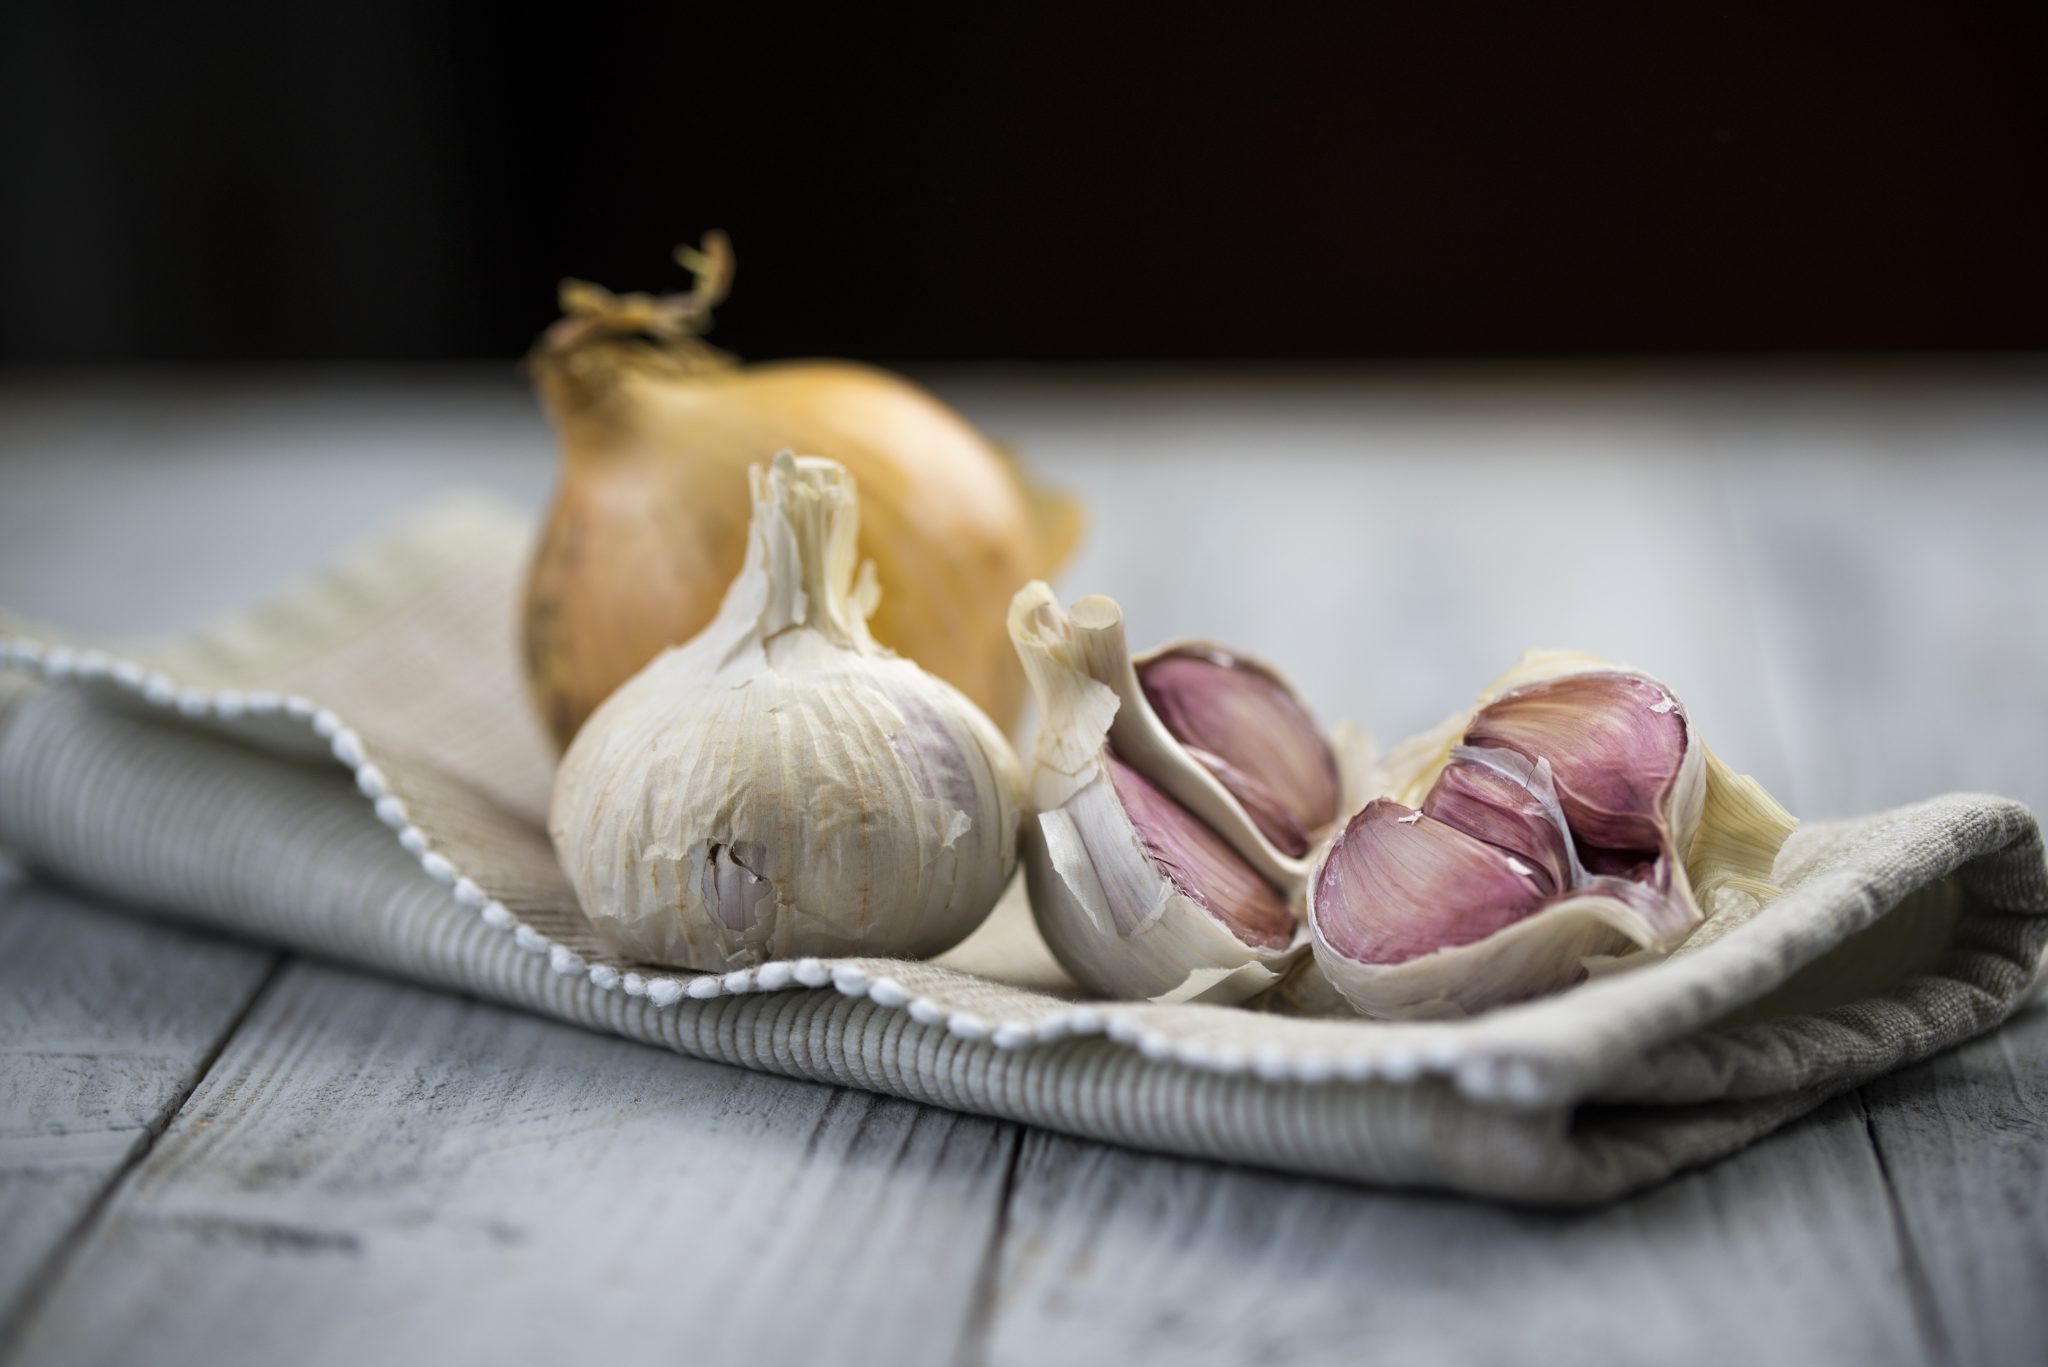 Can Garlic Treat Yeast Infection?